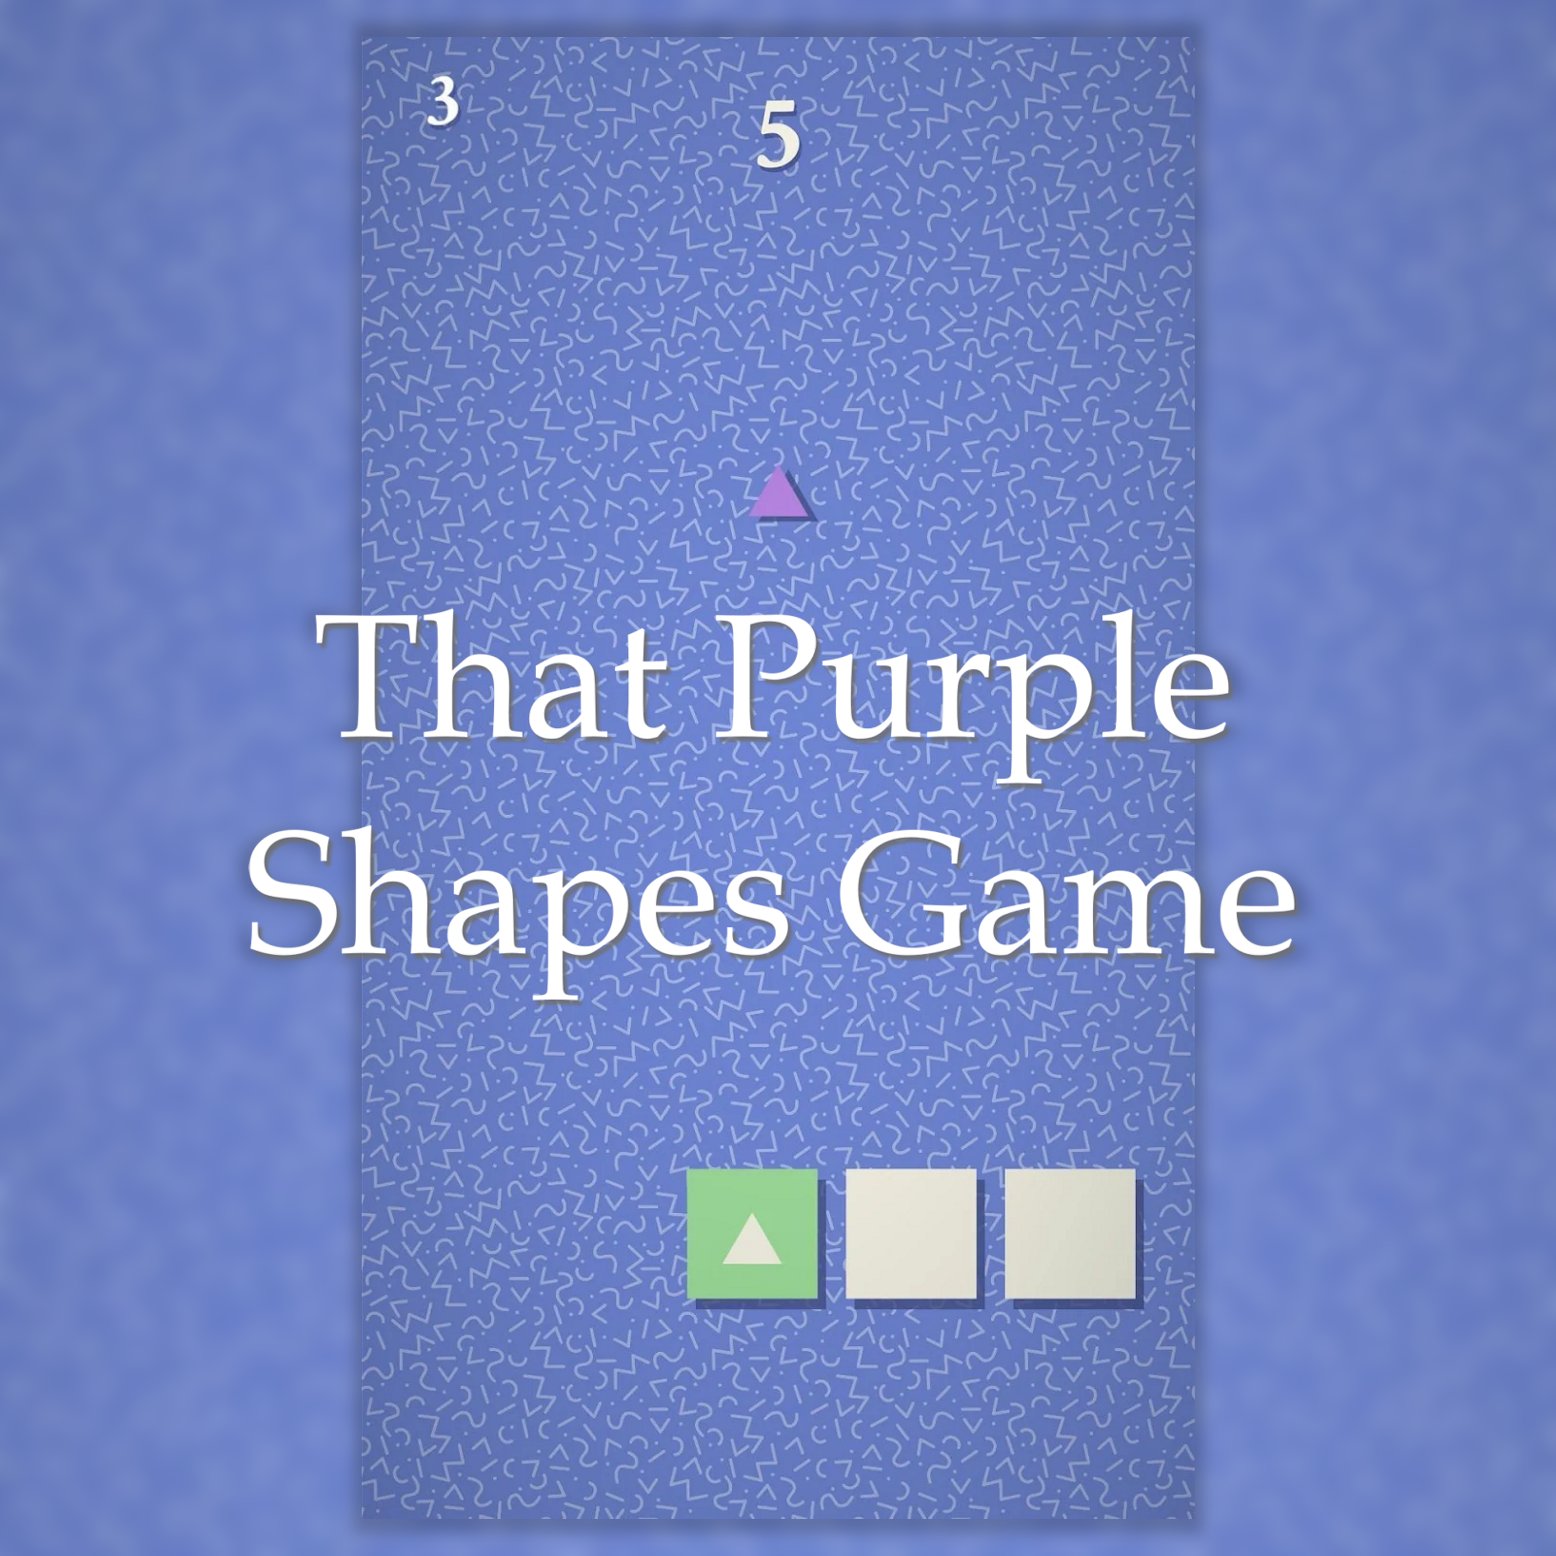 Project That Purple Shapes Game app image